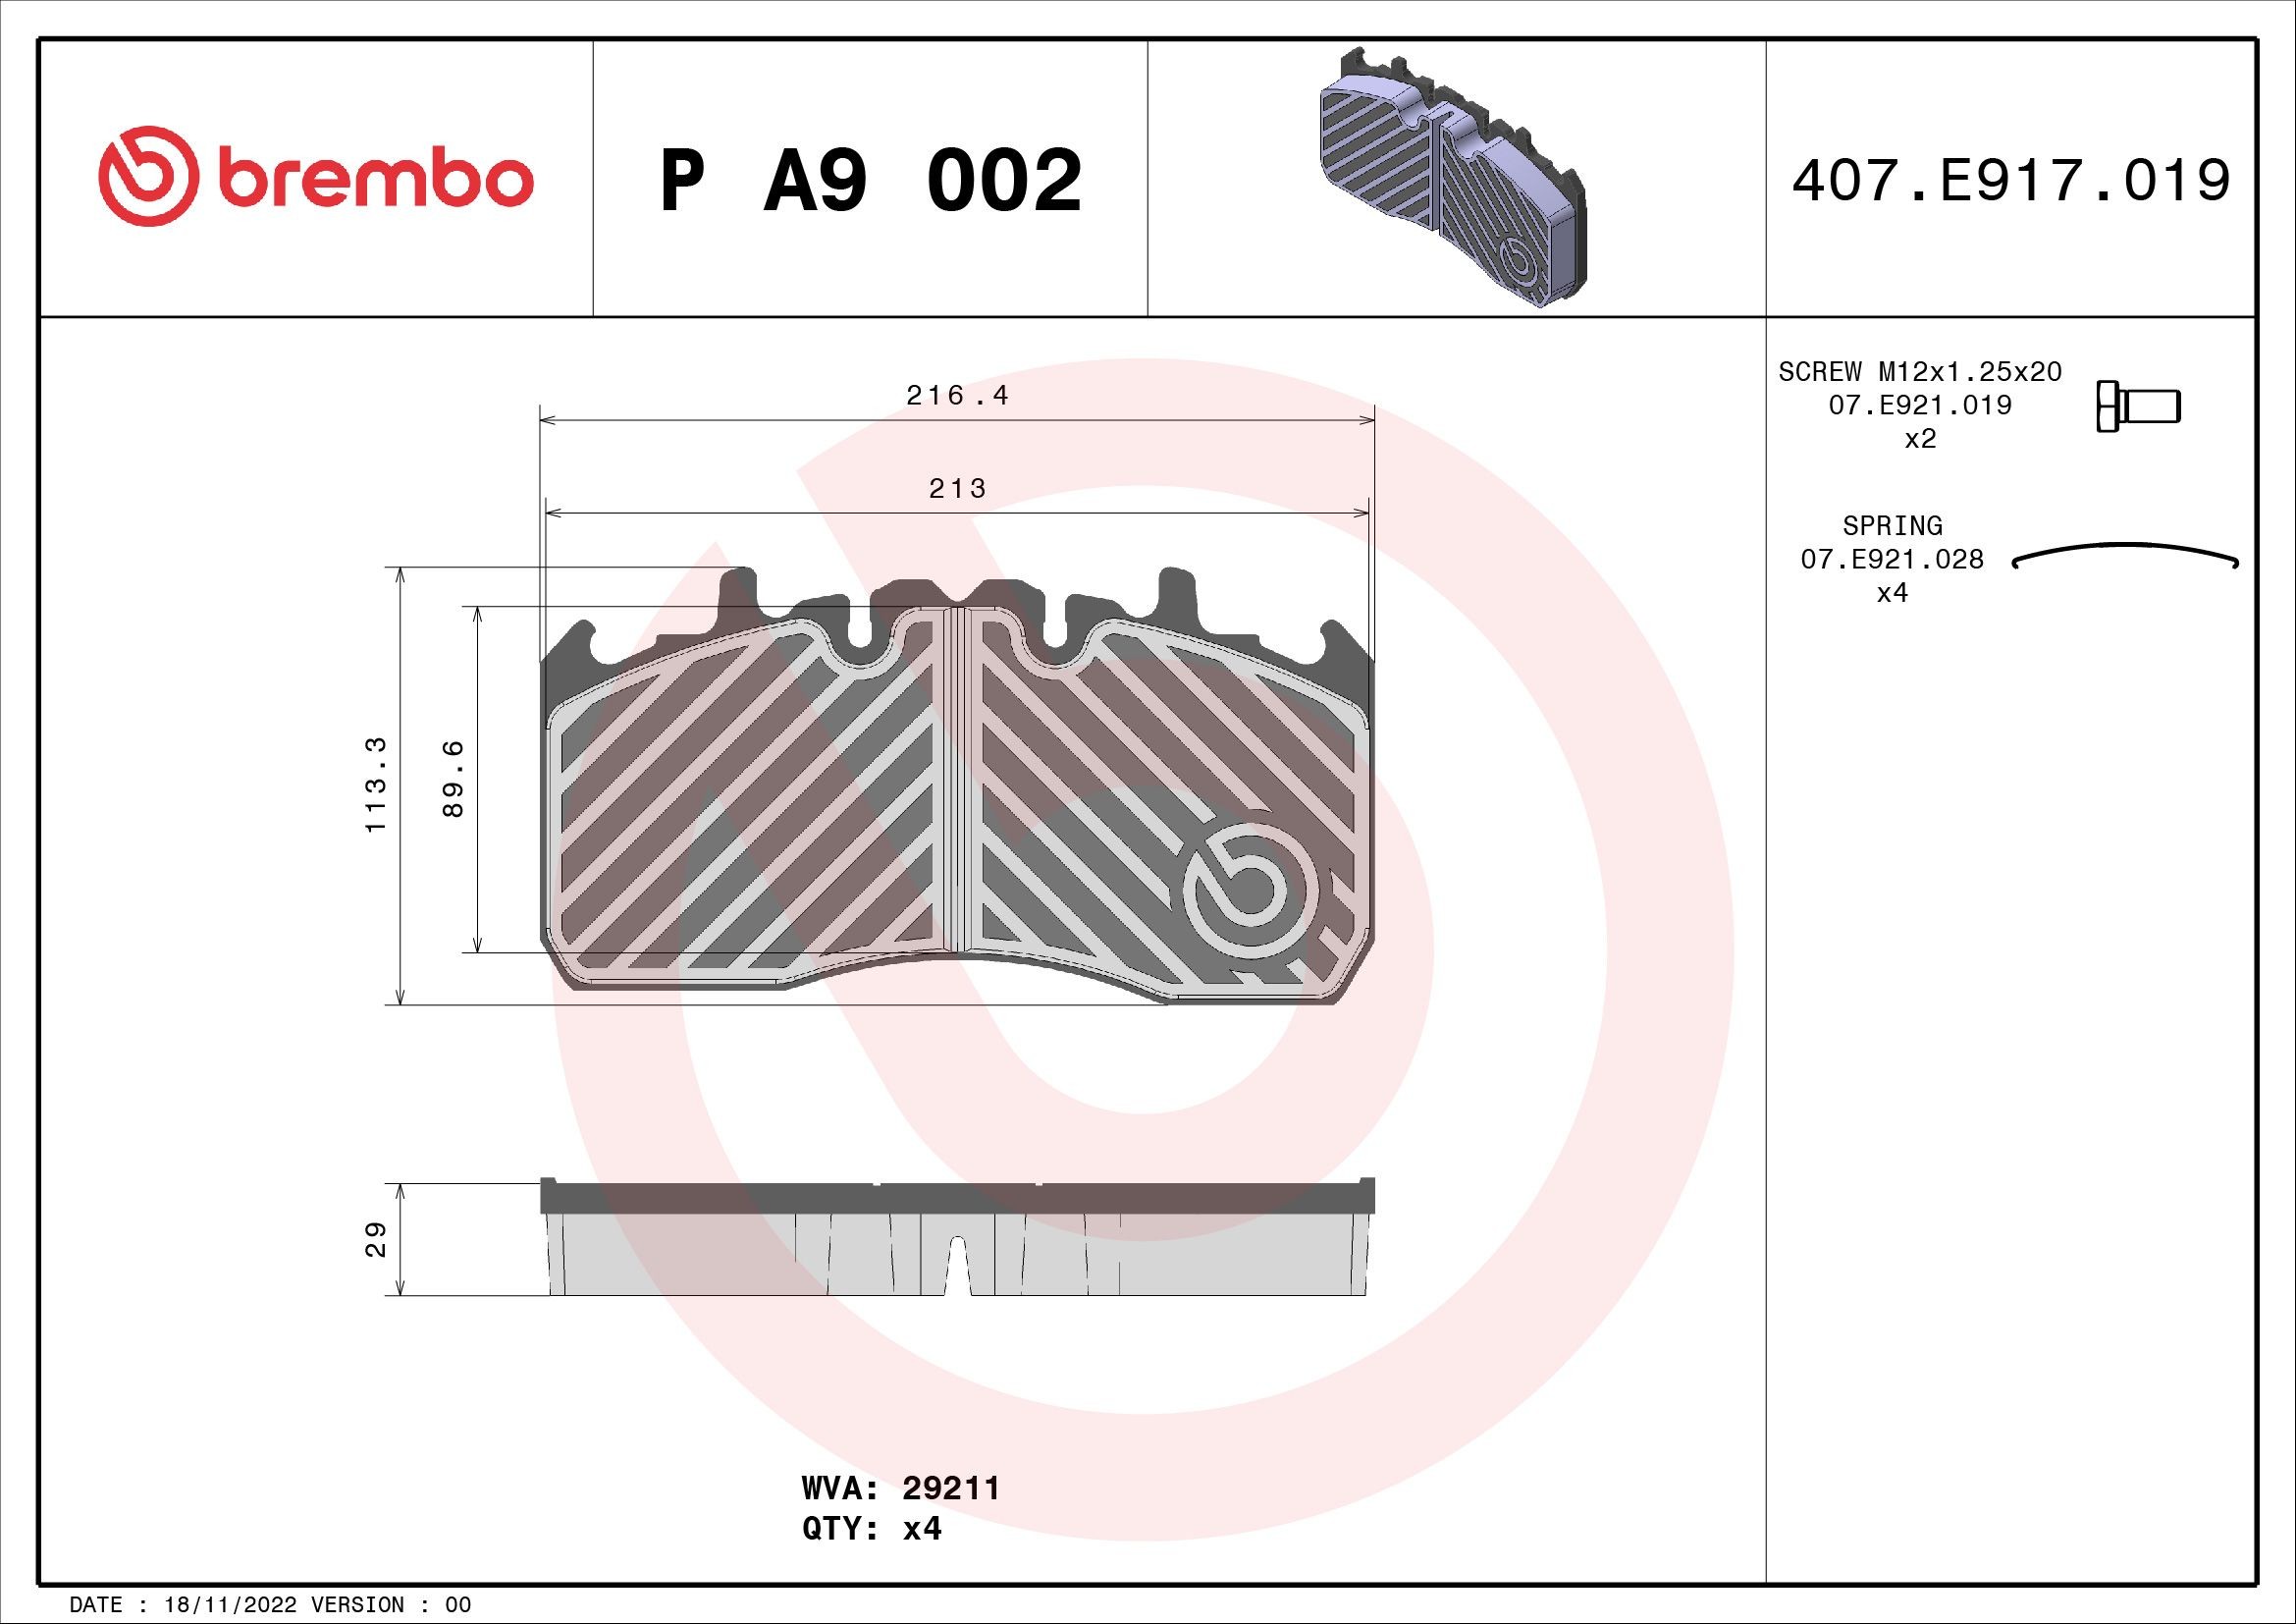 BREMBO prepared for wear indicator, with accessories Height: 114mm, Width: 216mm, Thickness: 29mm Brake pads P A9 002 buy